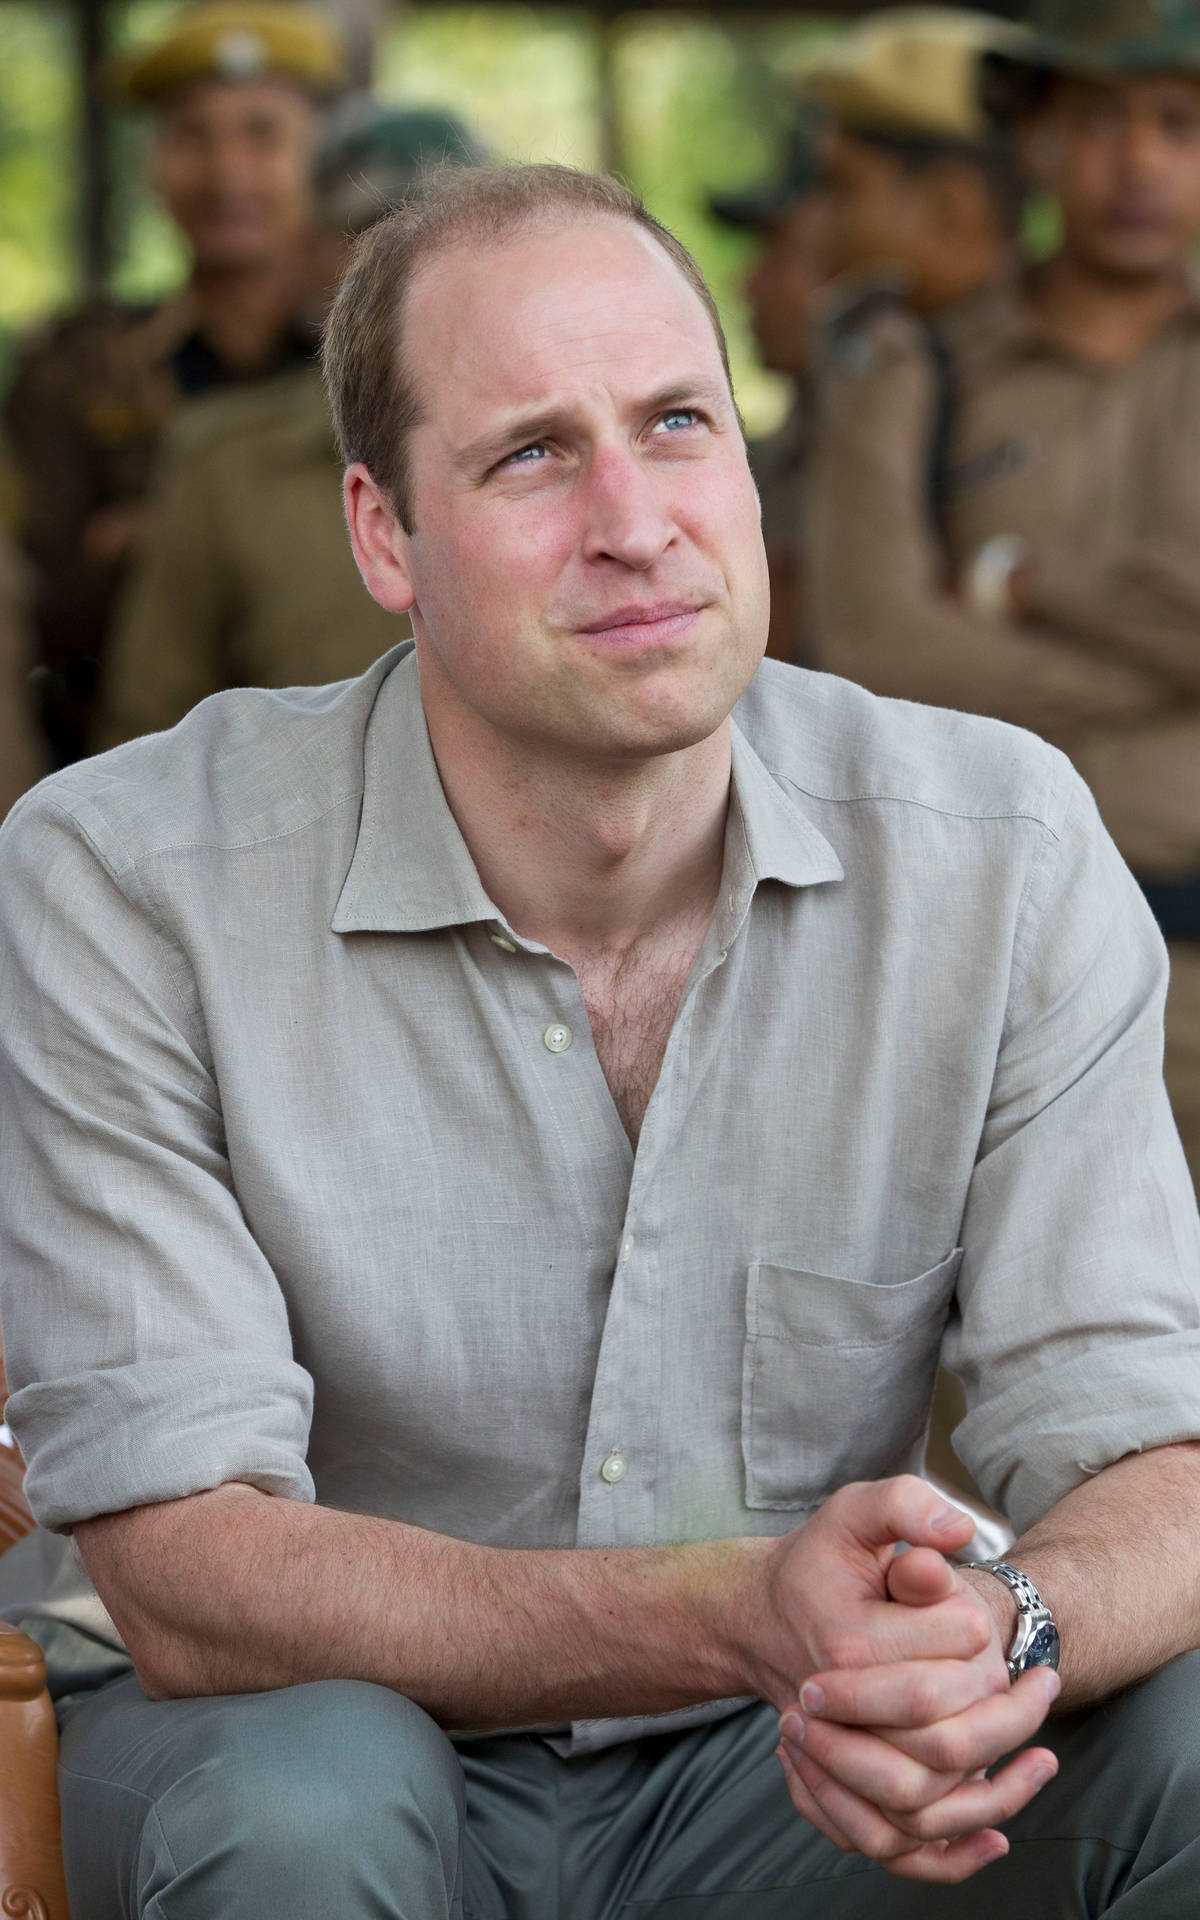 Prince William In Casual Clothes Wallpaper